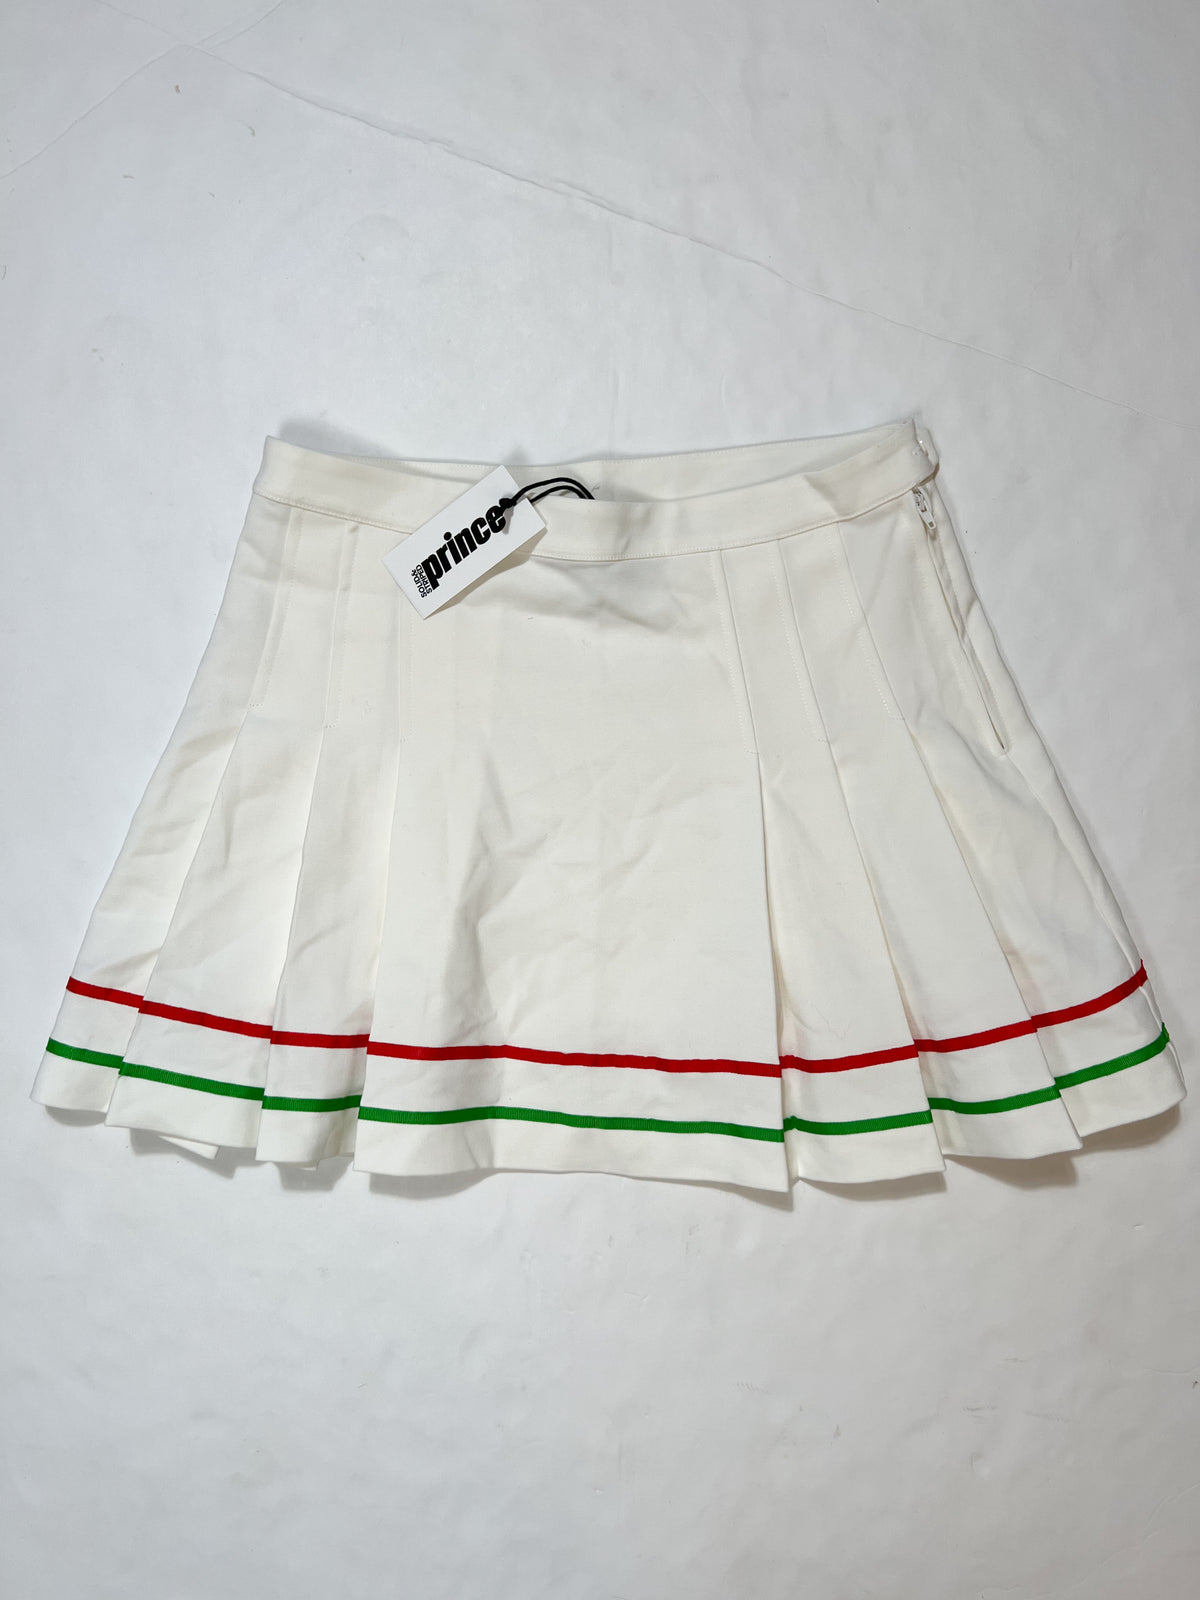 Prince- White Pleated Skirt New With Tags!